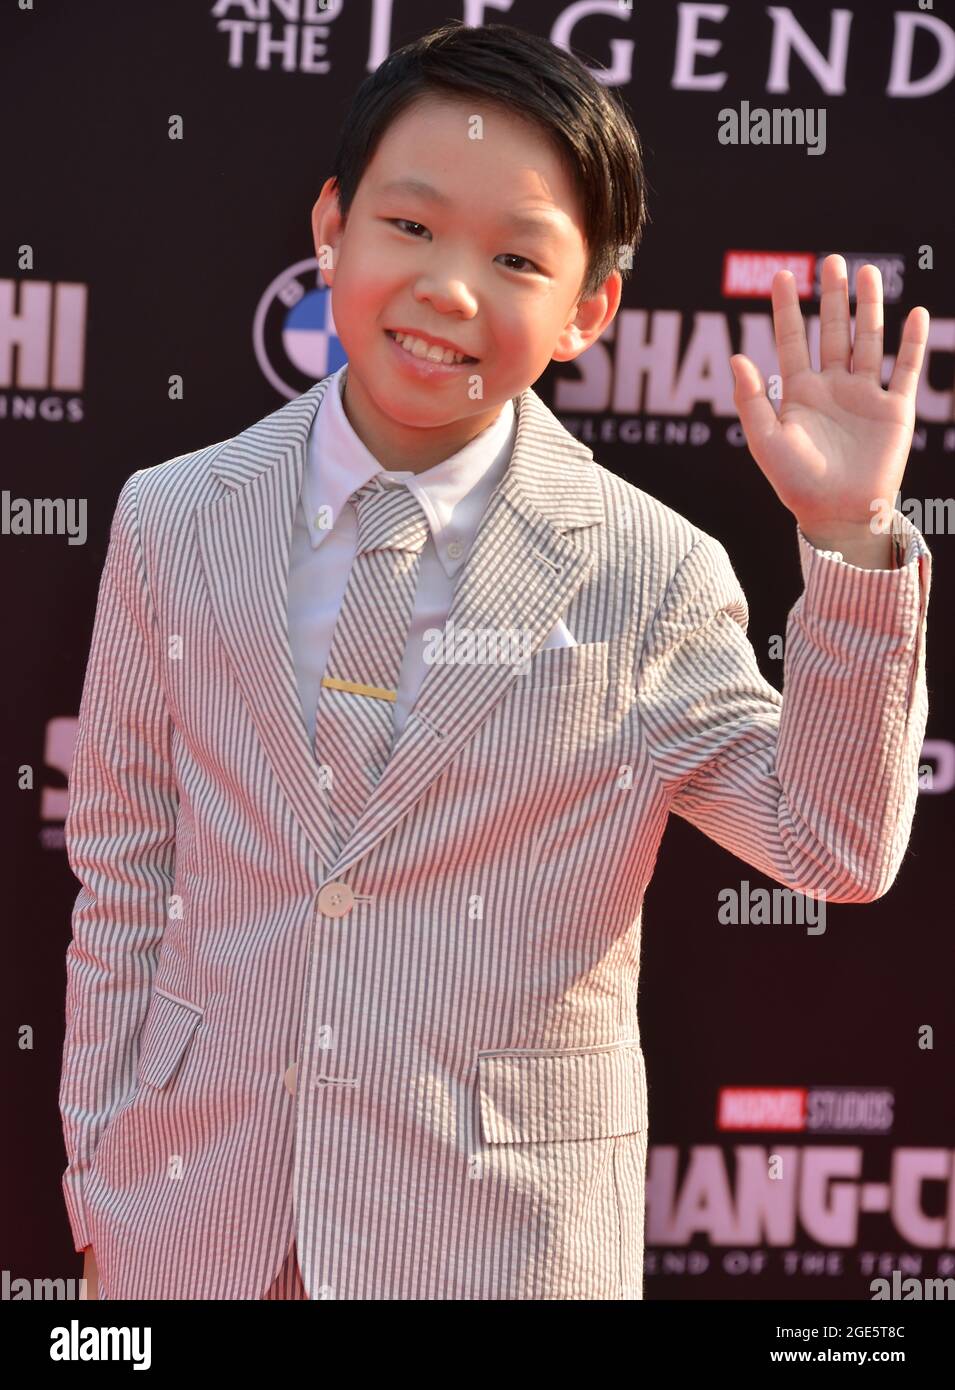 Los Angeles, USA. 17th Aug, 2021. Jayden Zhang attends the Disney Marvel Premiere of Shang-Chi and the Legend of the Ten Rings at the El Capitan Theatre in Los Angeles. August 16, 2021. Credit: Tsuni/USA/Alamy Live News Stock Photo